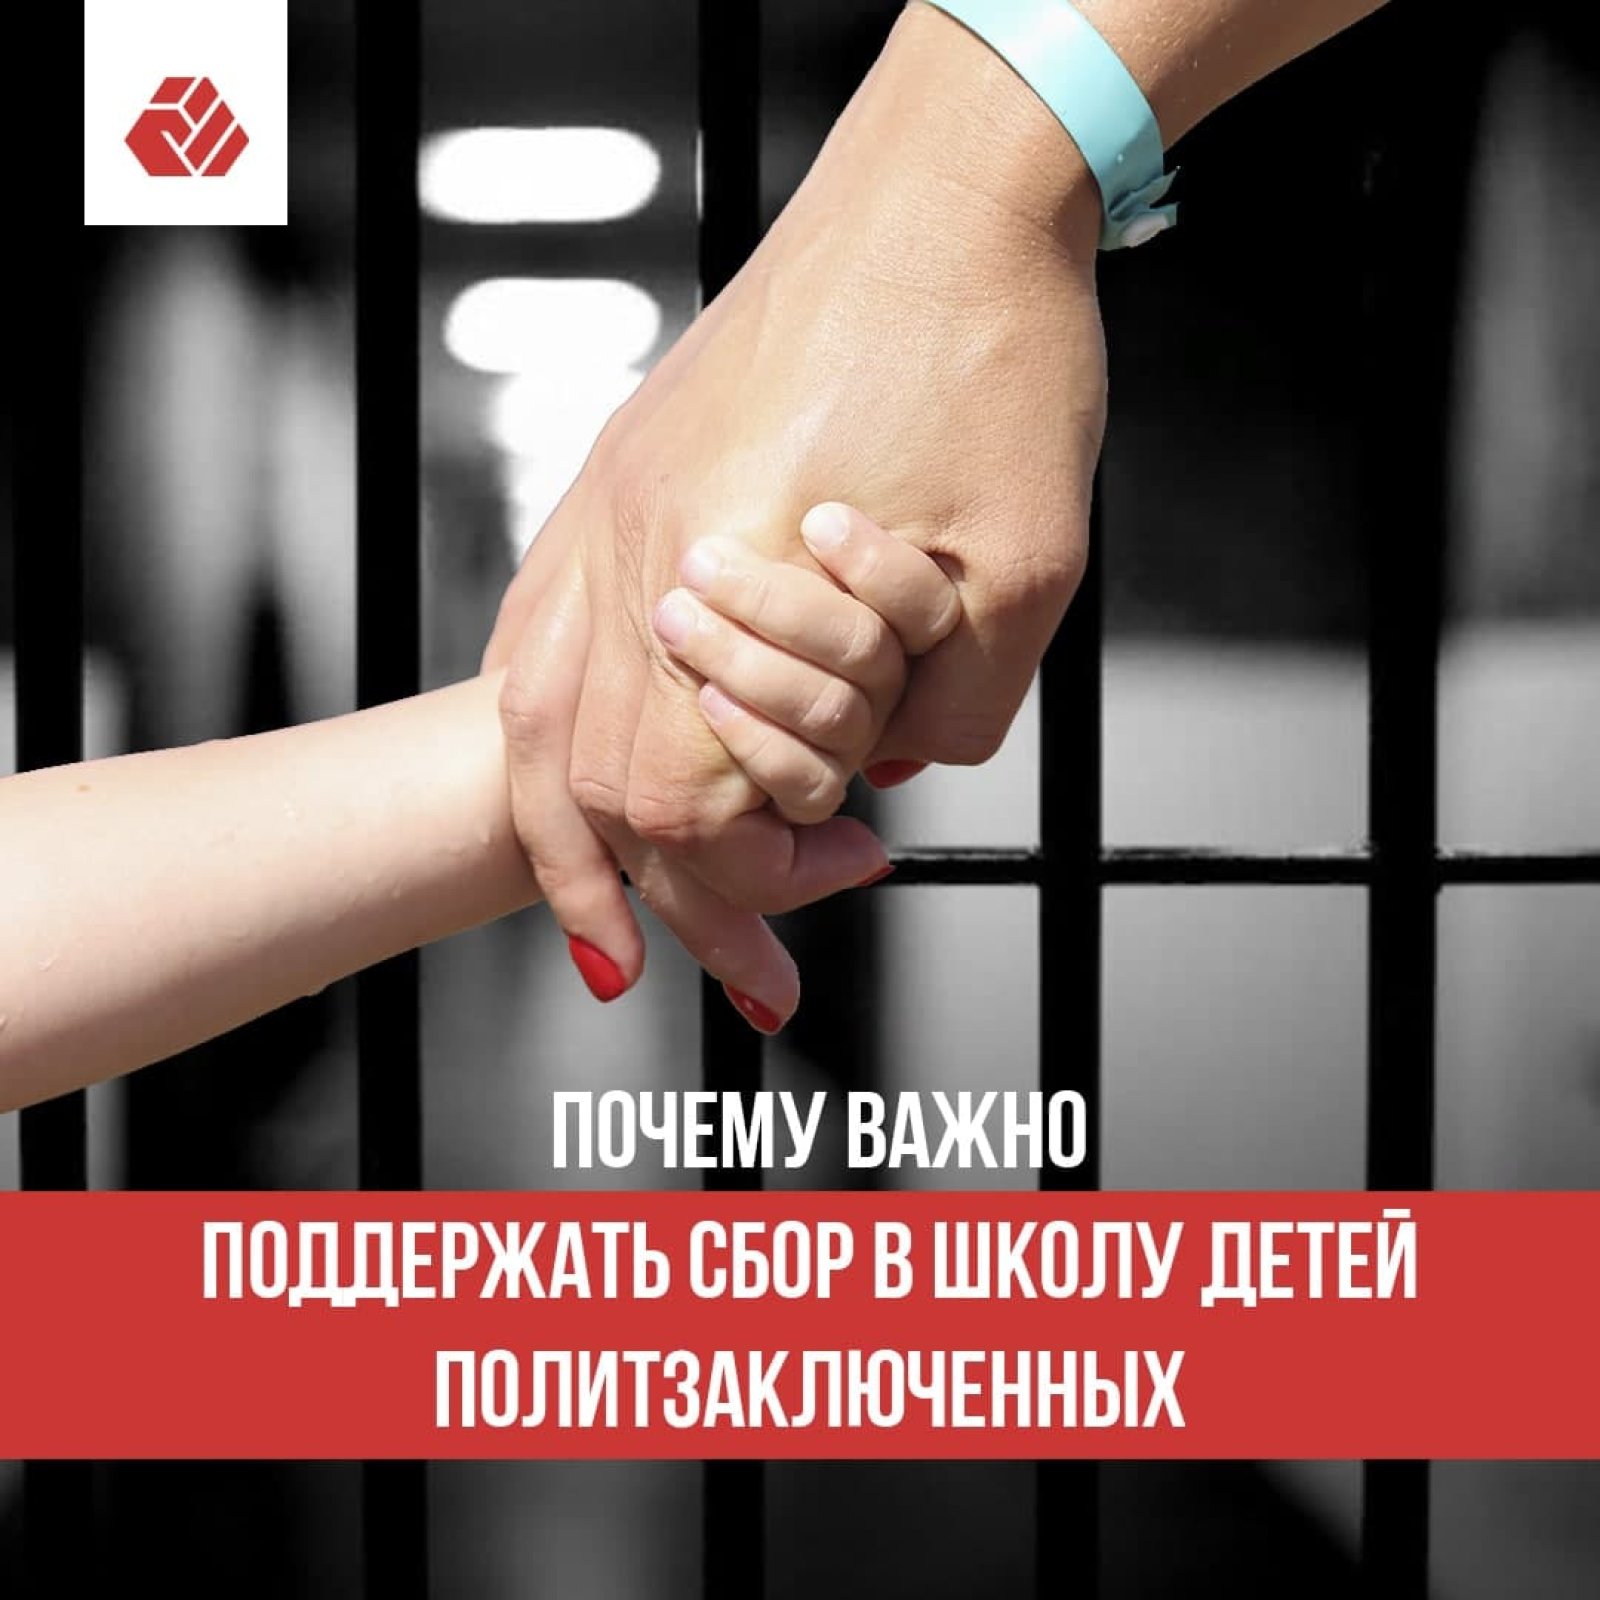 Why is it important to support the gathering of children of political prisoners to school